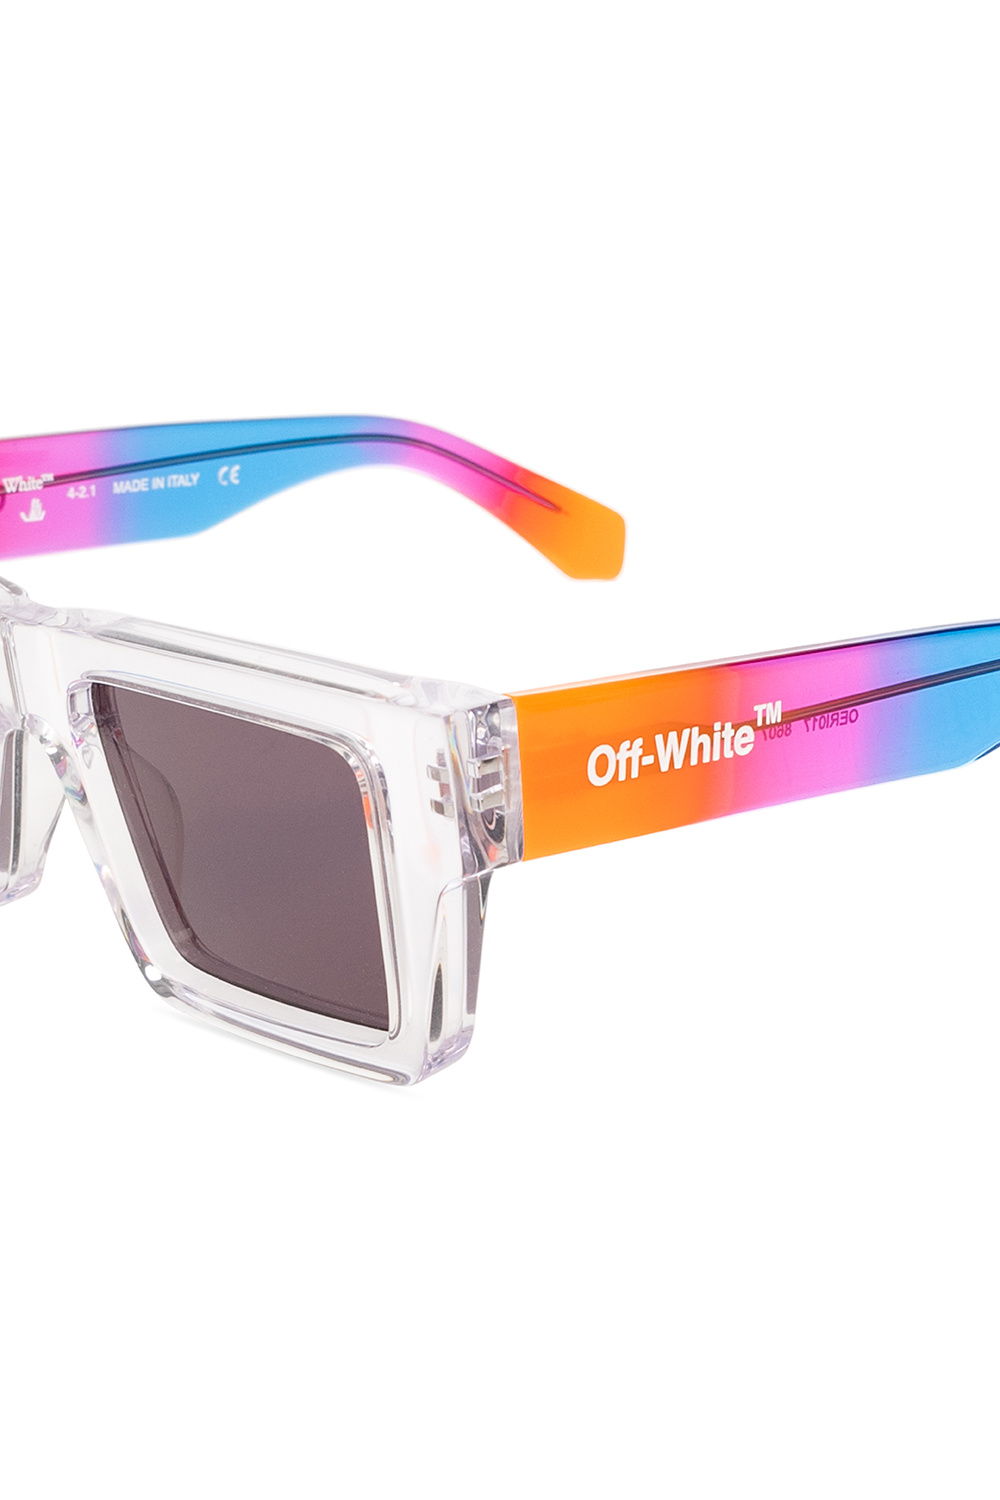 Off-White™ c/o “The Sun” pink rose shades available at Off-White